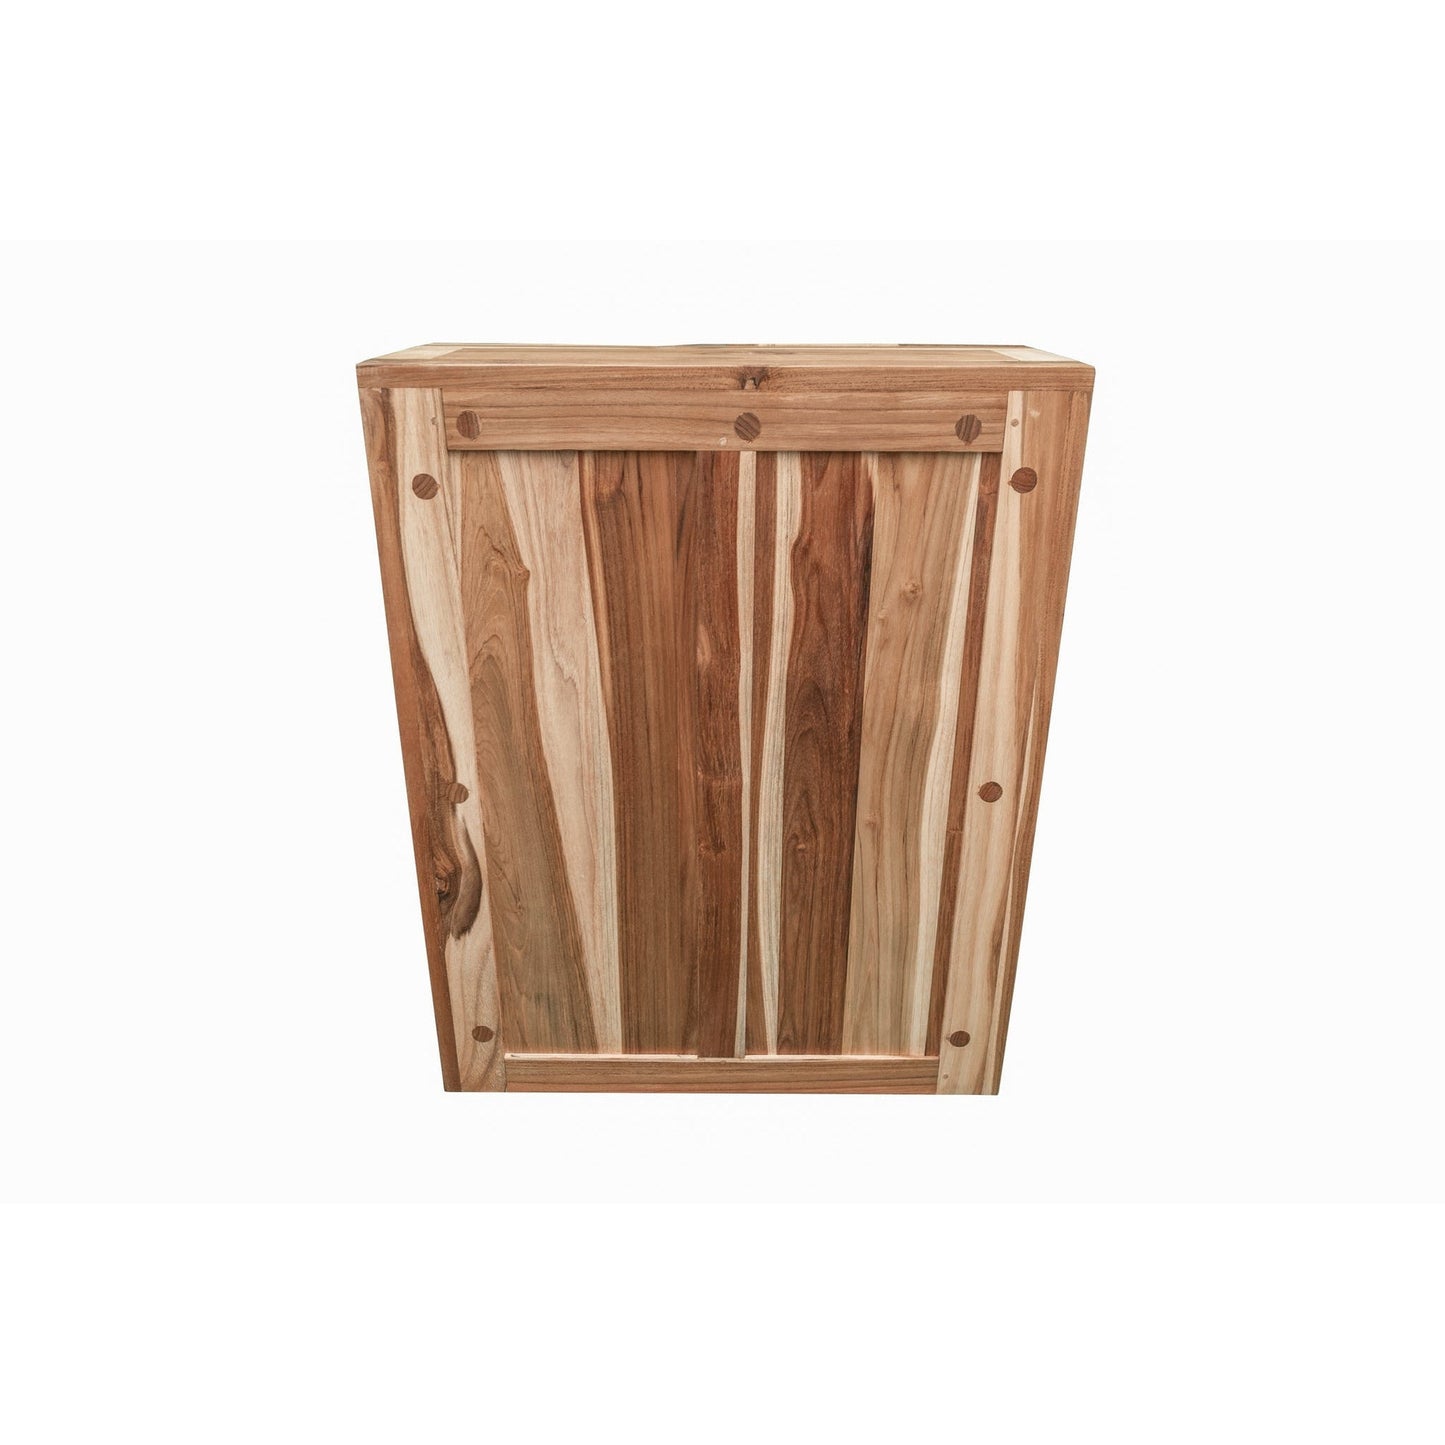 EcoDecors Tranquility 24" EarthyTeak Solid Teak Wood Fully Assembled Wall Cabinet